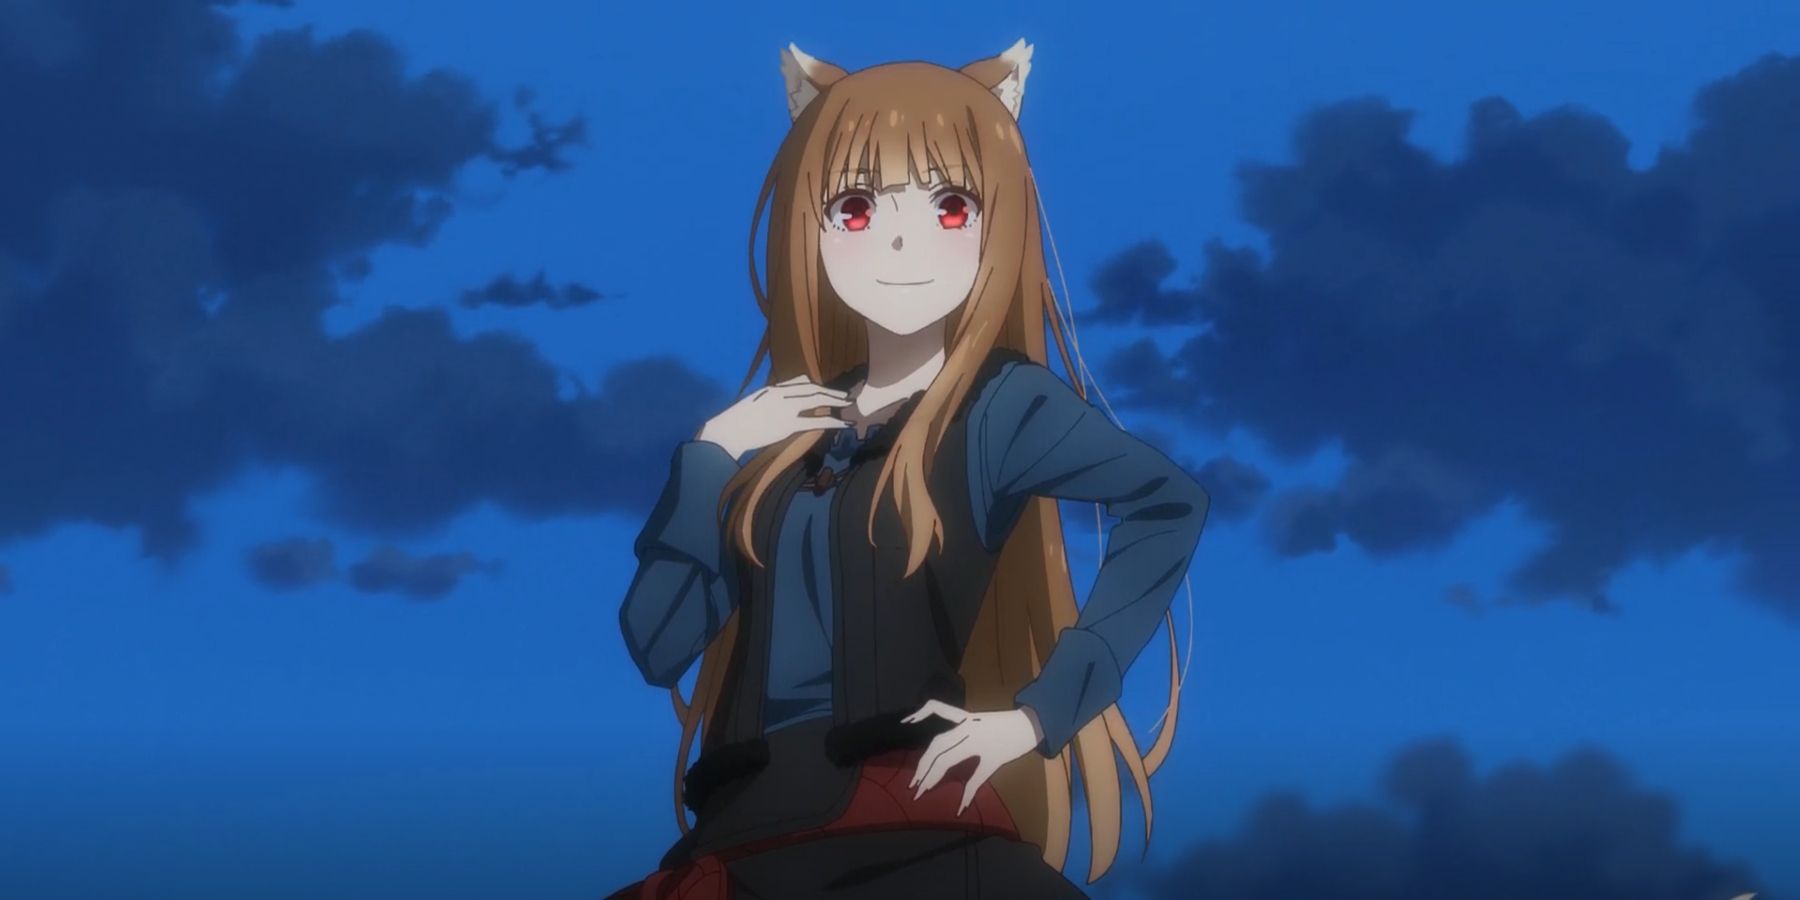 Holo From Spice and Wolf